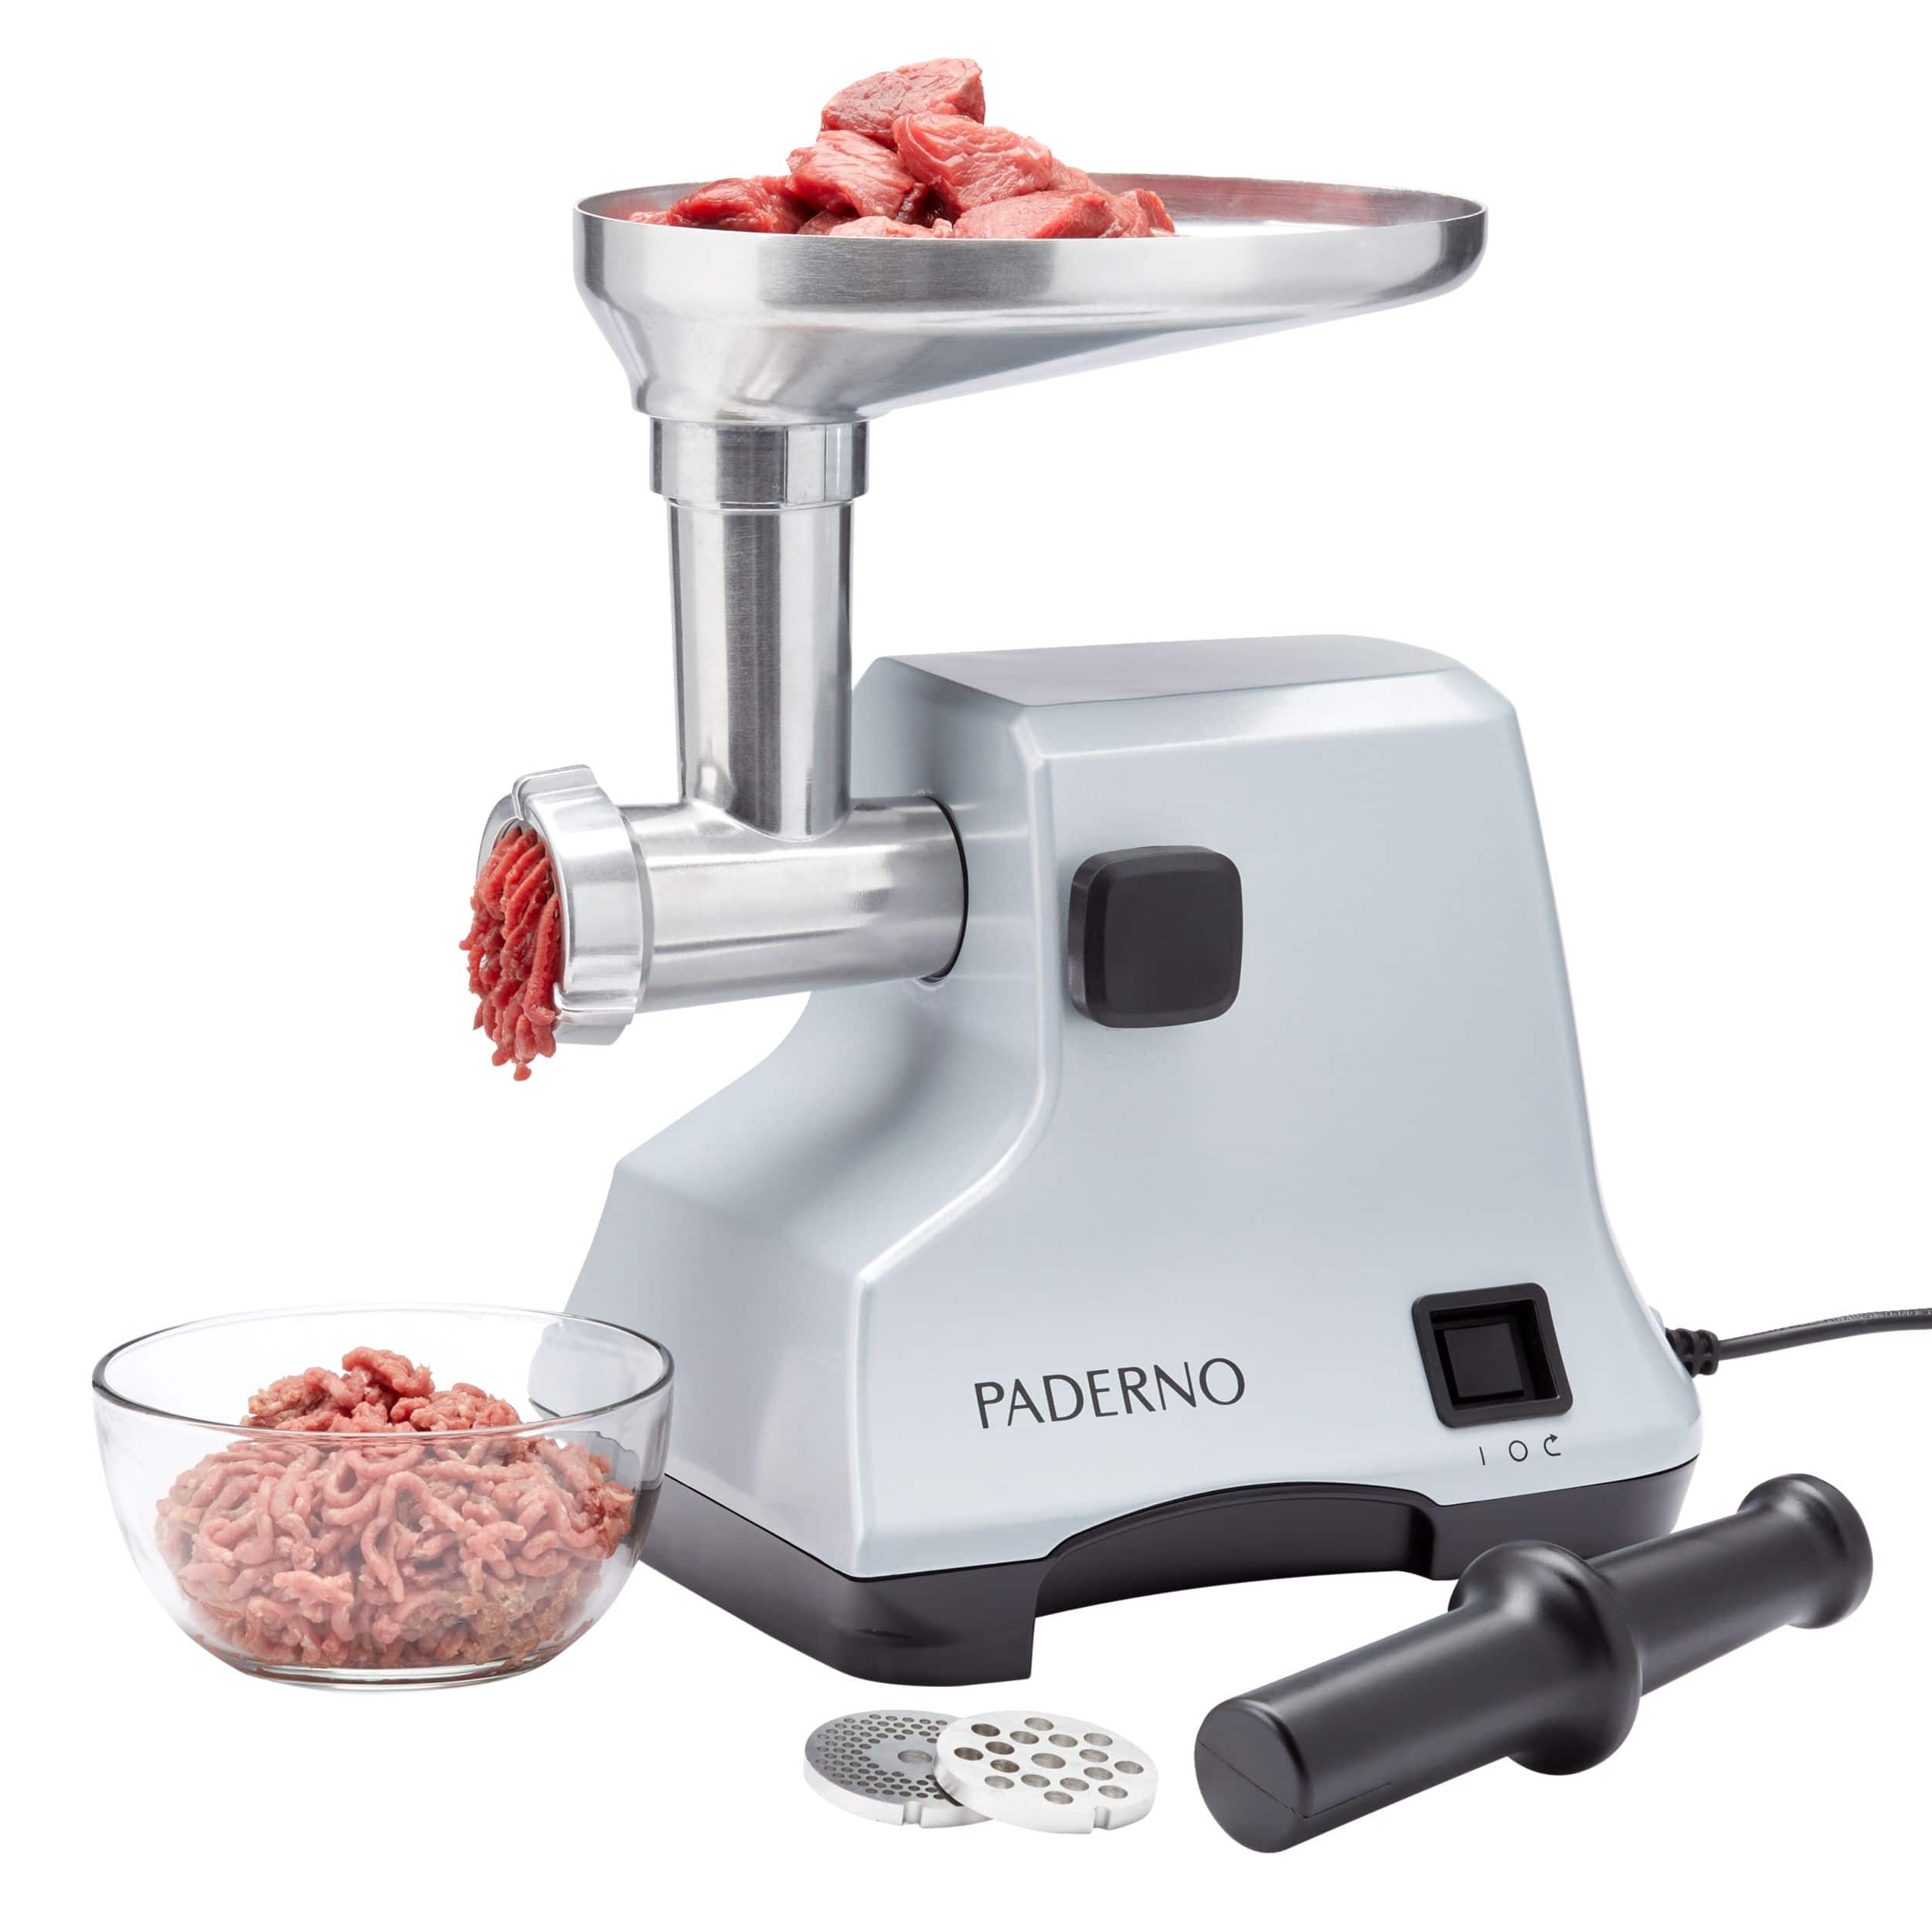 https://media-www.canadiantire.ca/product/living/kitchen/kitchen-appliances/0431030/paderno-electric-meat-grinder-424bd0f8-b649-4d7e-920e-c5e804b66a68-jpgrendition.jpg